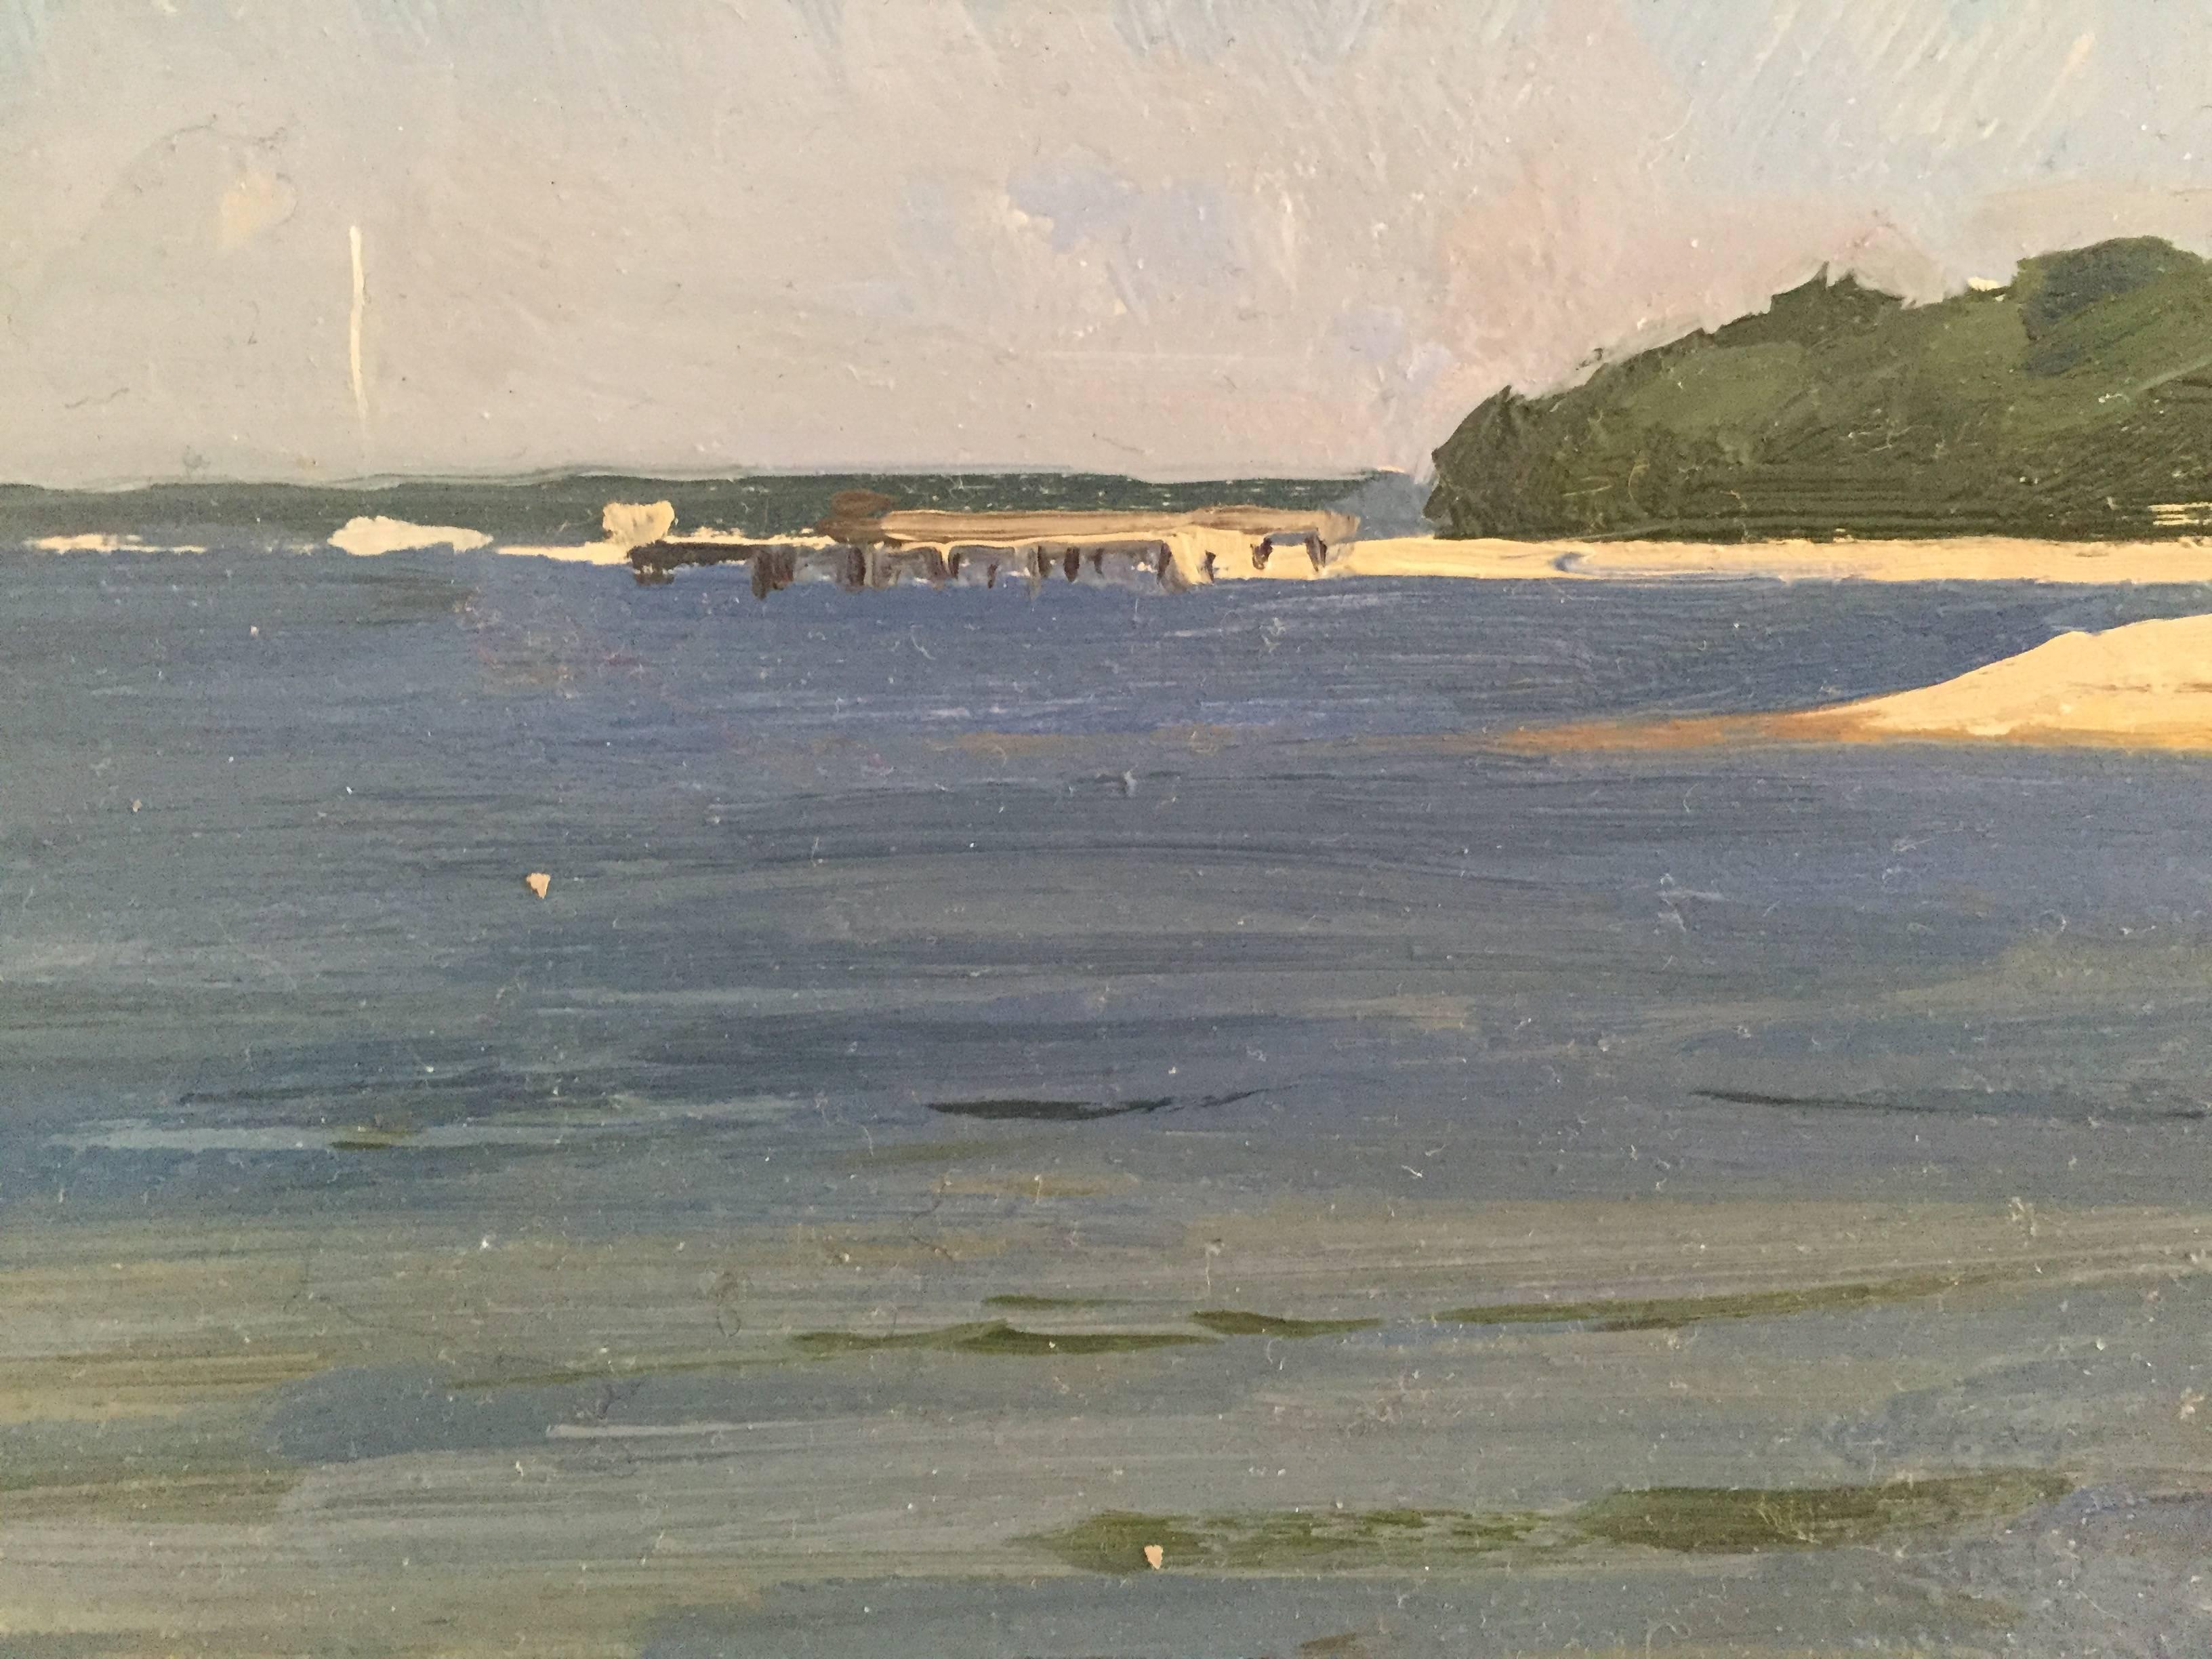 Long Beach, also known as Foster's Memorial Beach in Sag Harbor, New York. Dalessio captures the essence of the bay on the east end of long island so perfectly, with his hues of green mixed in with the tone of the water, it is clear that Dalessio